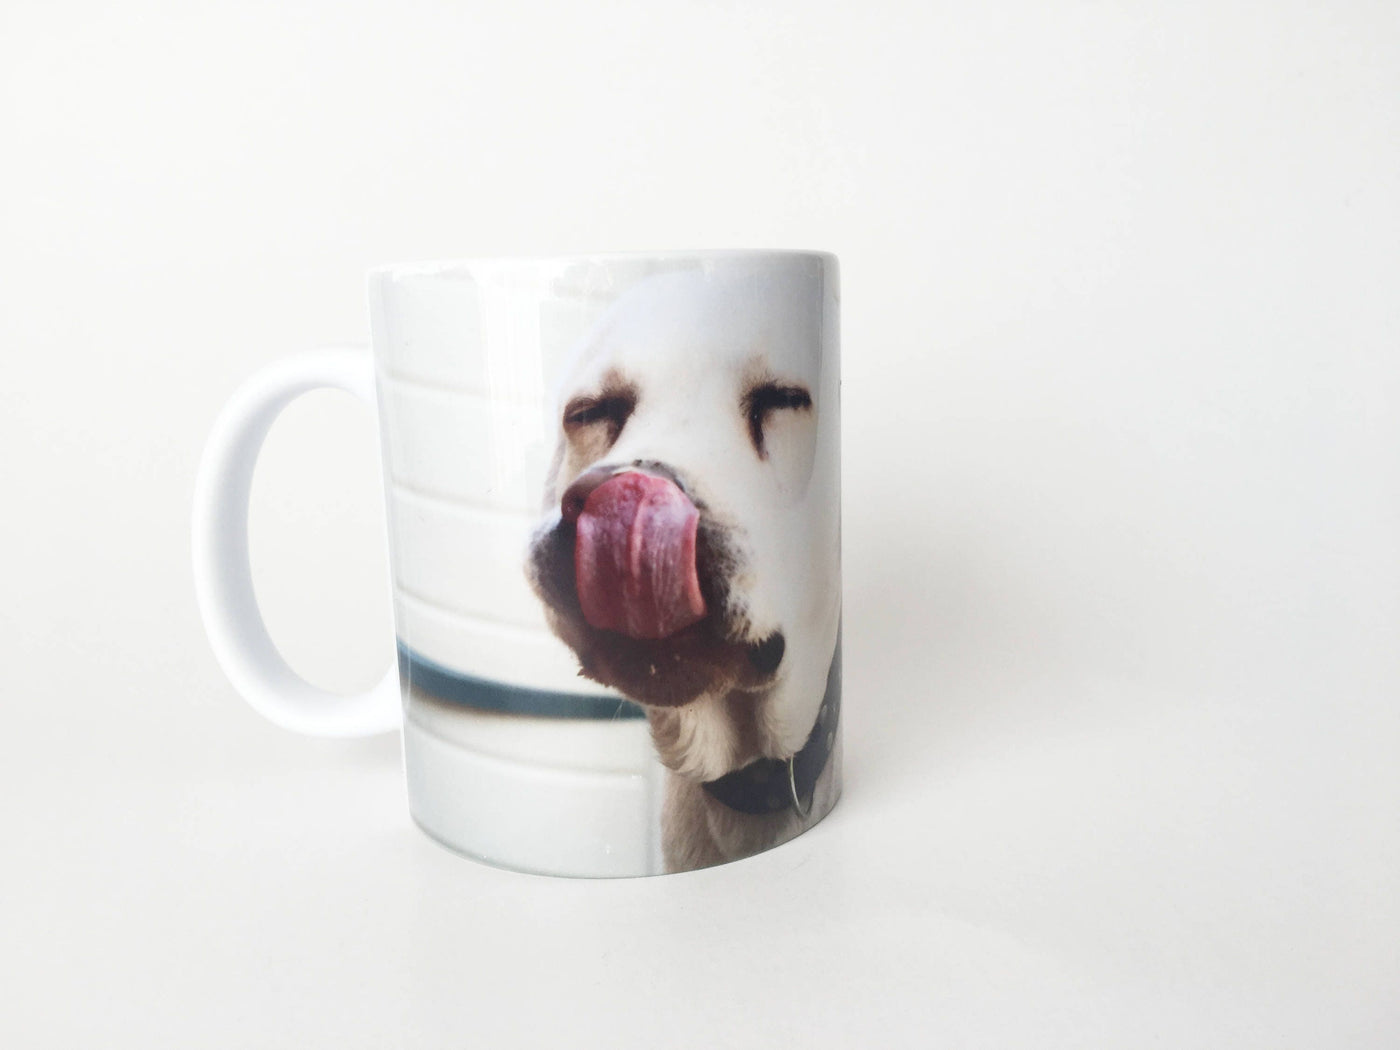 Mug with your pet's photo, custom pet memorial mug, gift for pet owners, gift animal lover, gift for dog lovers, personalized coffee cup